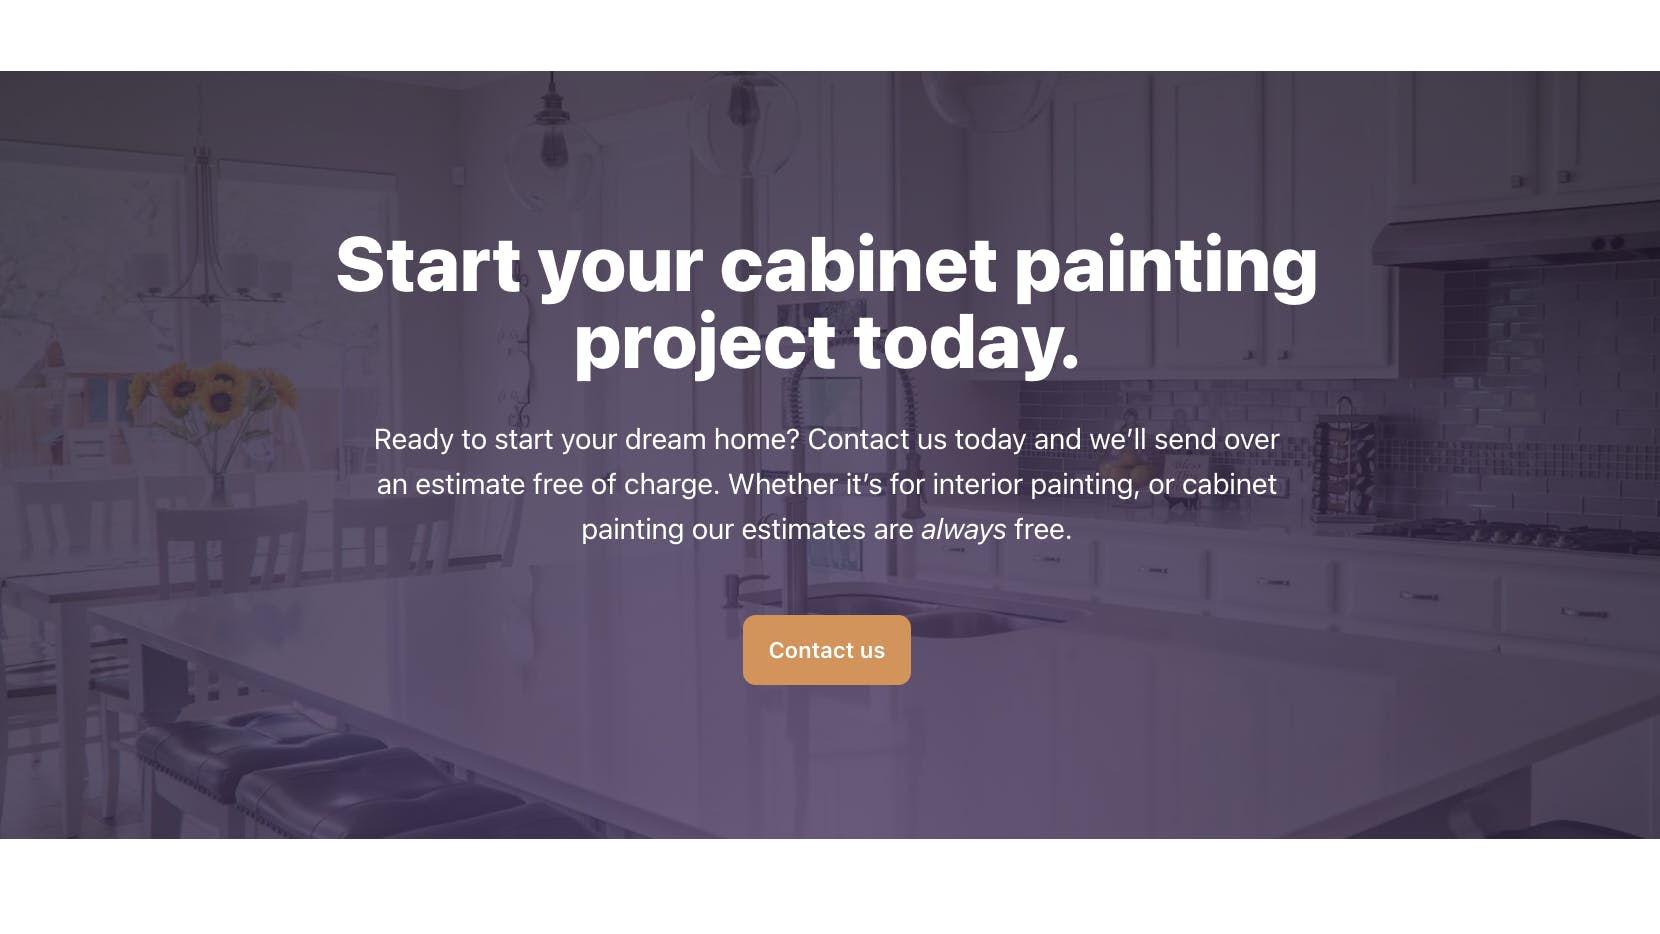 Promotional banner encouraging starting a cabinet painting project with a background image of a bright kitchen. The text overlay invites viewers to contact for a free estimate, highlighting services for interior and cabinet painting. A 'Contact us' button is prominently displayed against the muted image of the kitchen